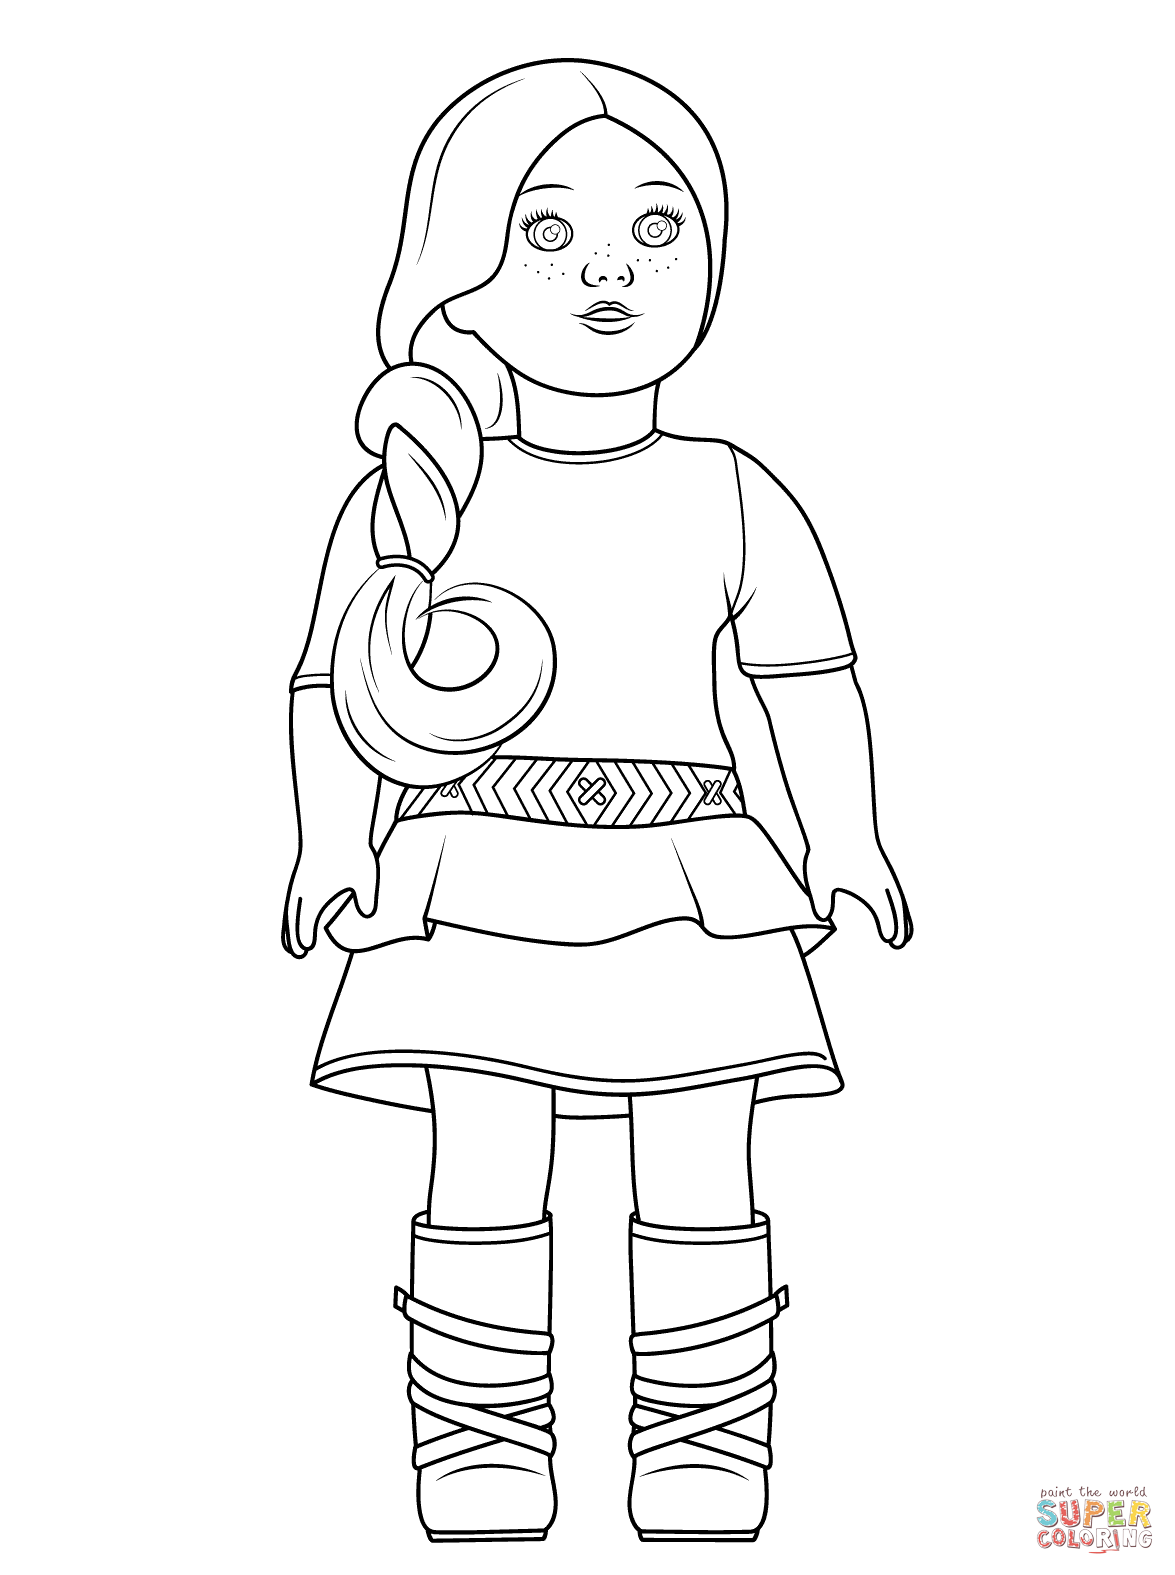 American Girl Coloring Page - Coloring Pages for Kids and for Adults